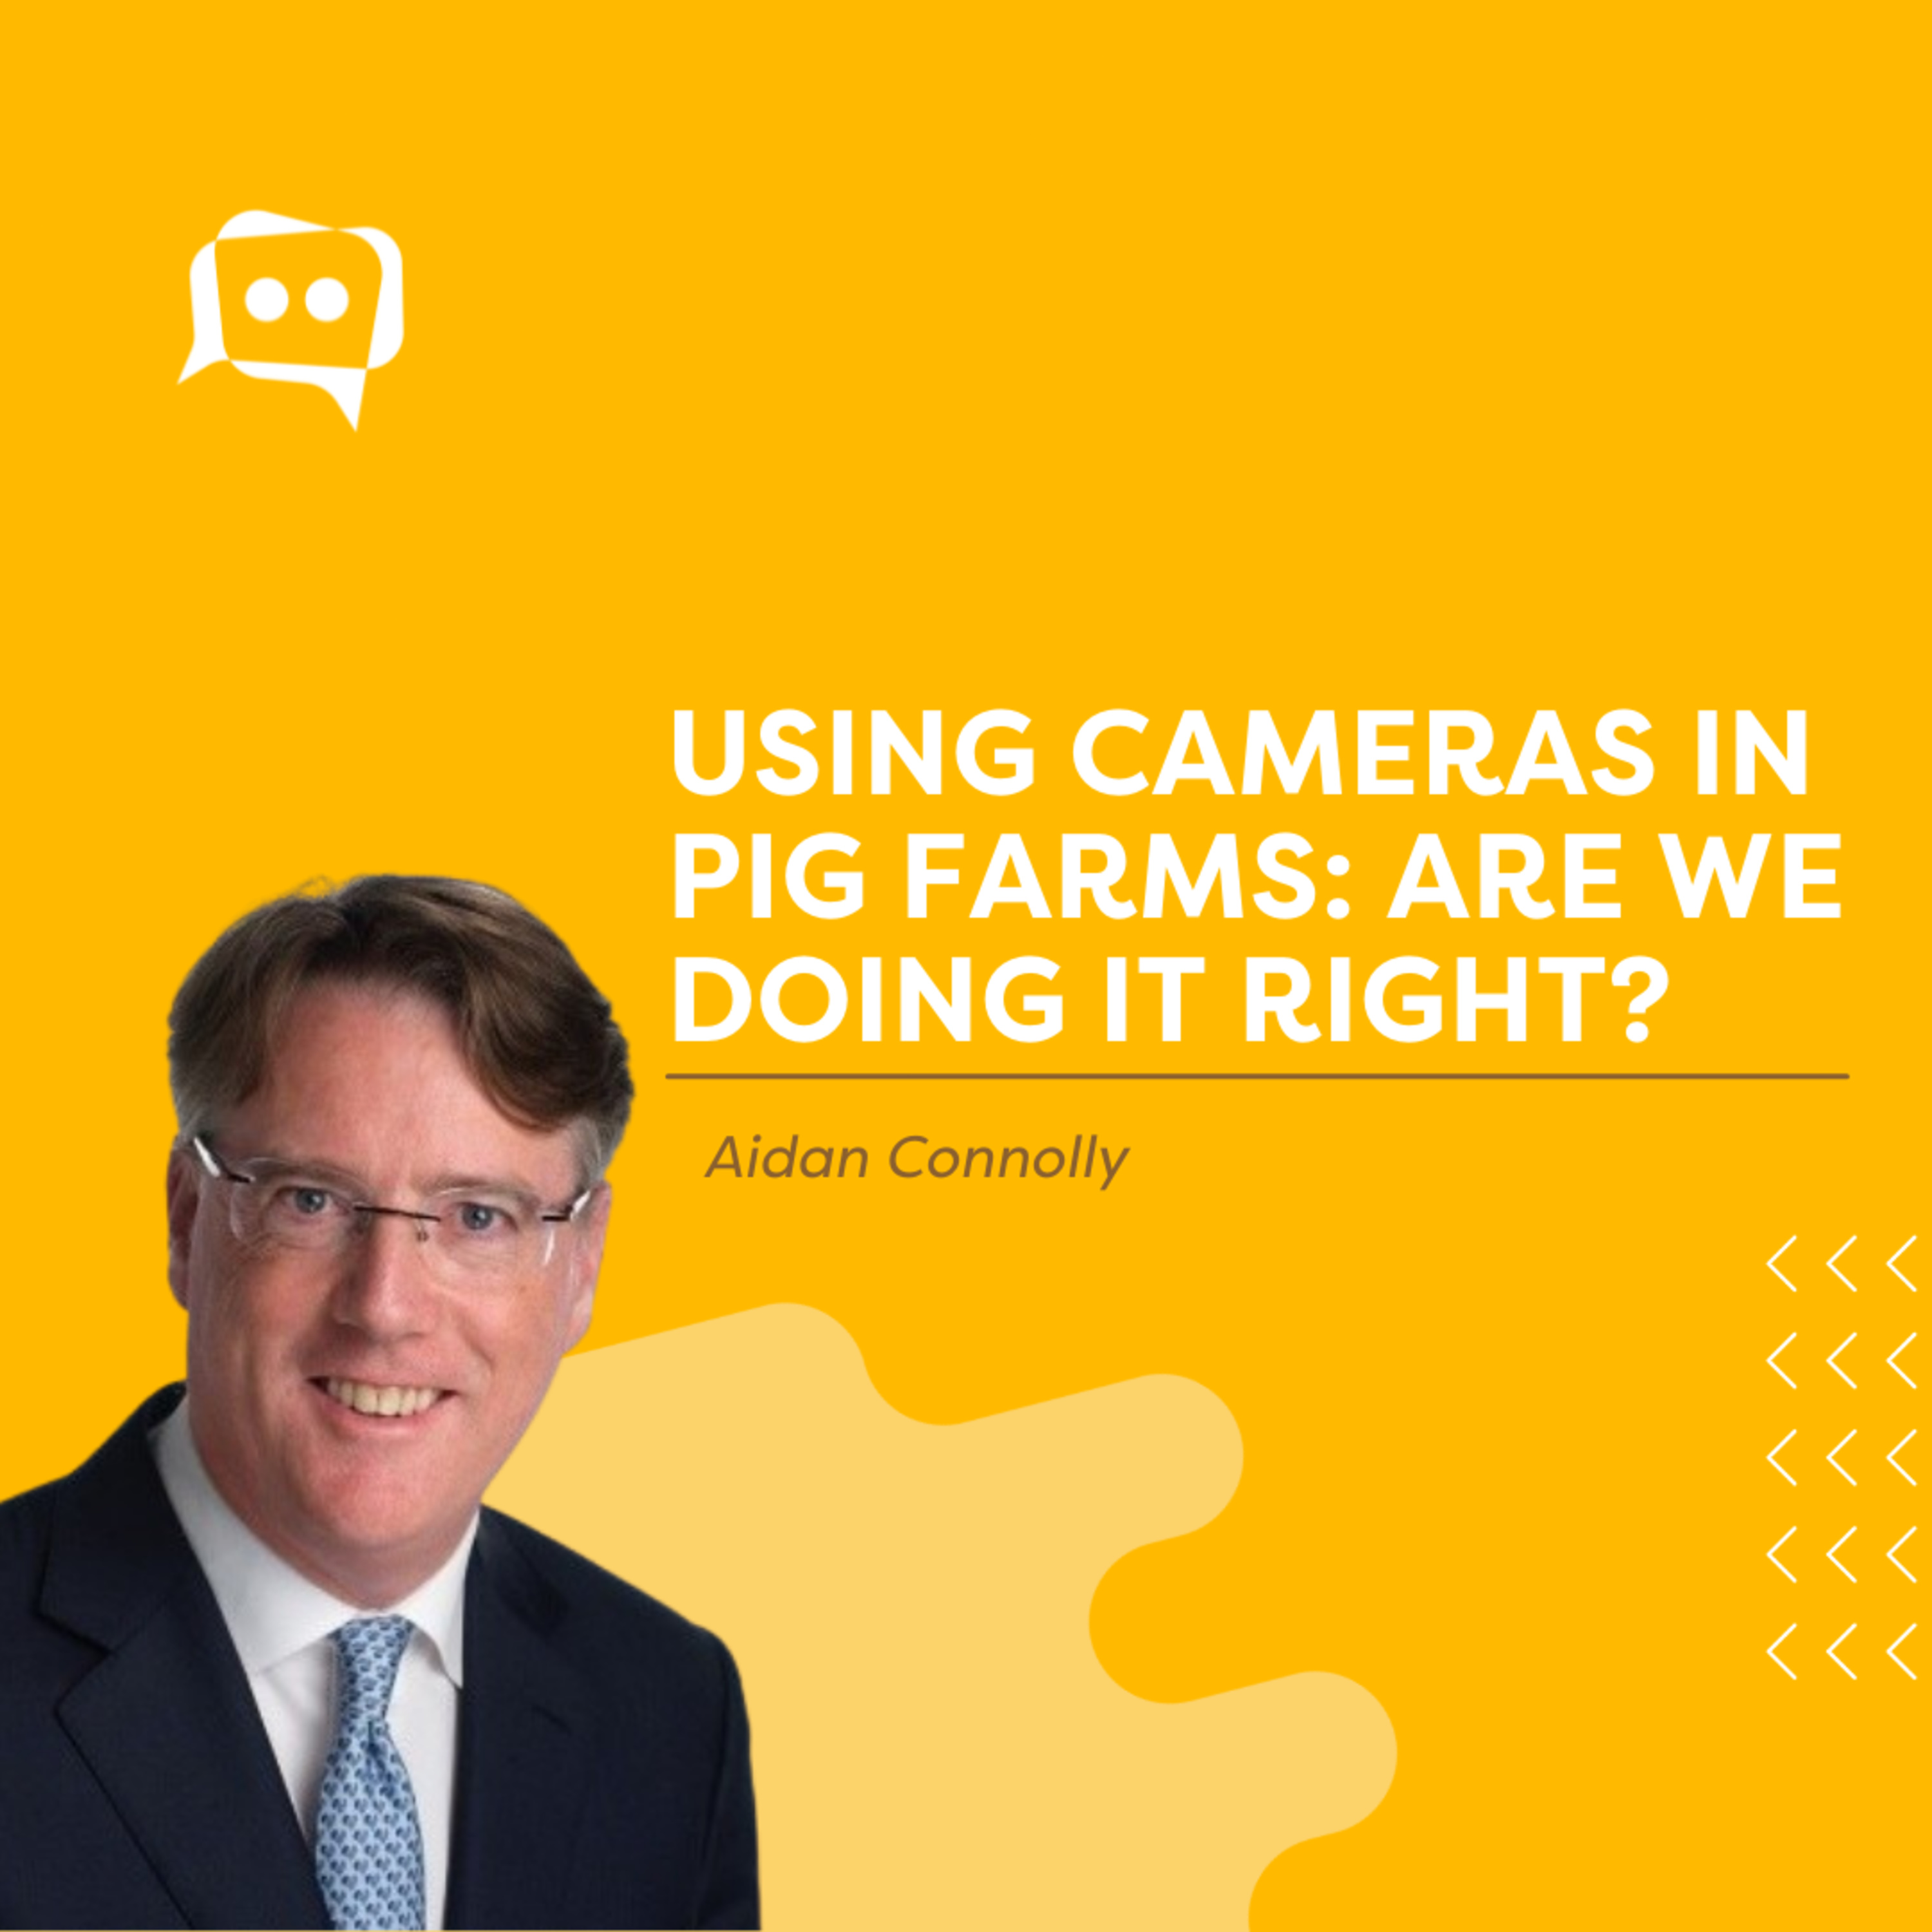 #SHORTS: Using cameras in pig farms: are we doing it right? With Aidan Connolly